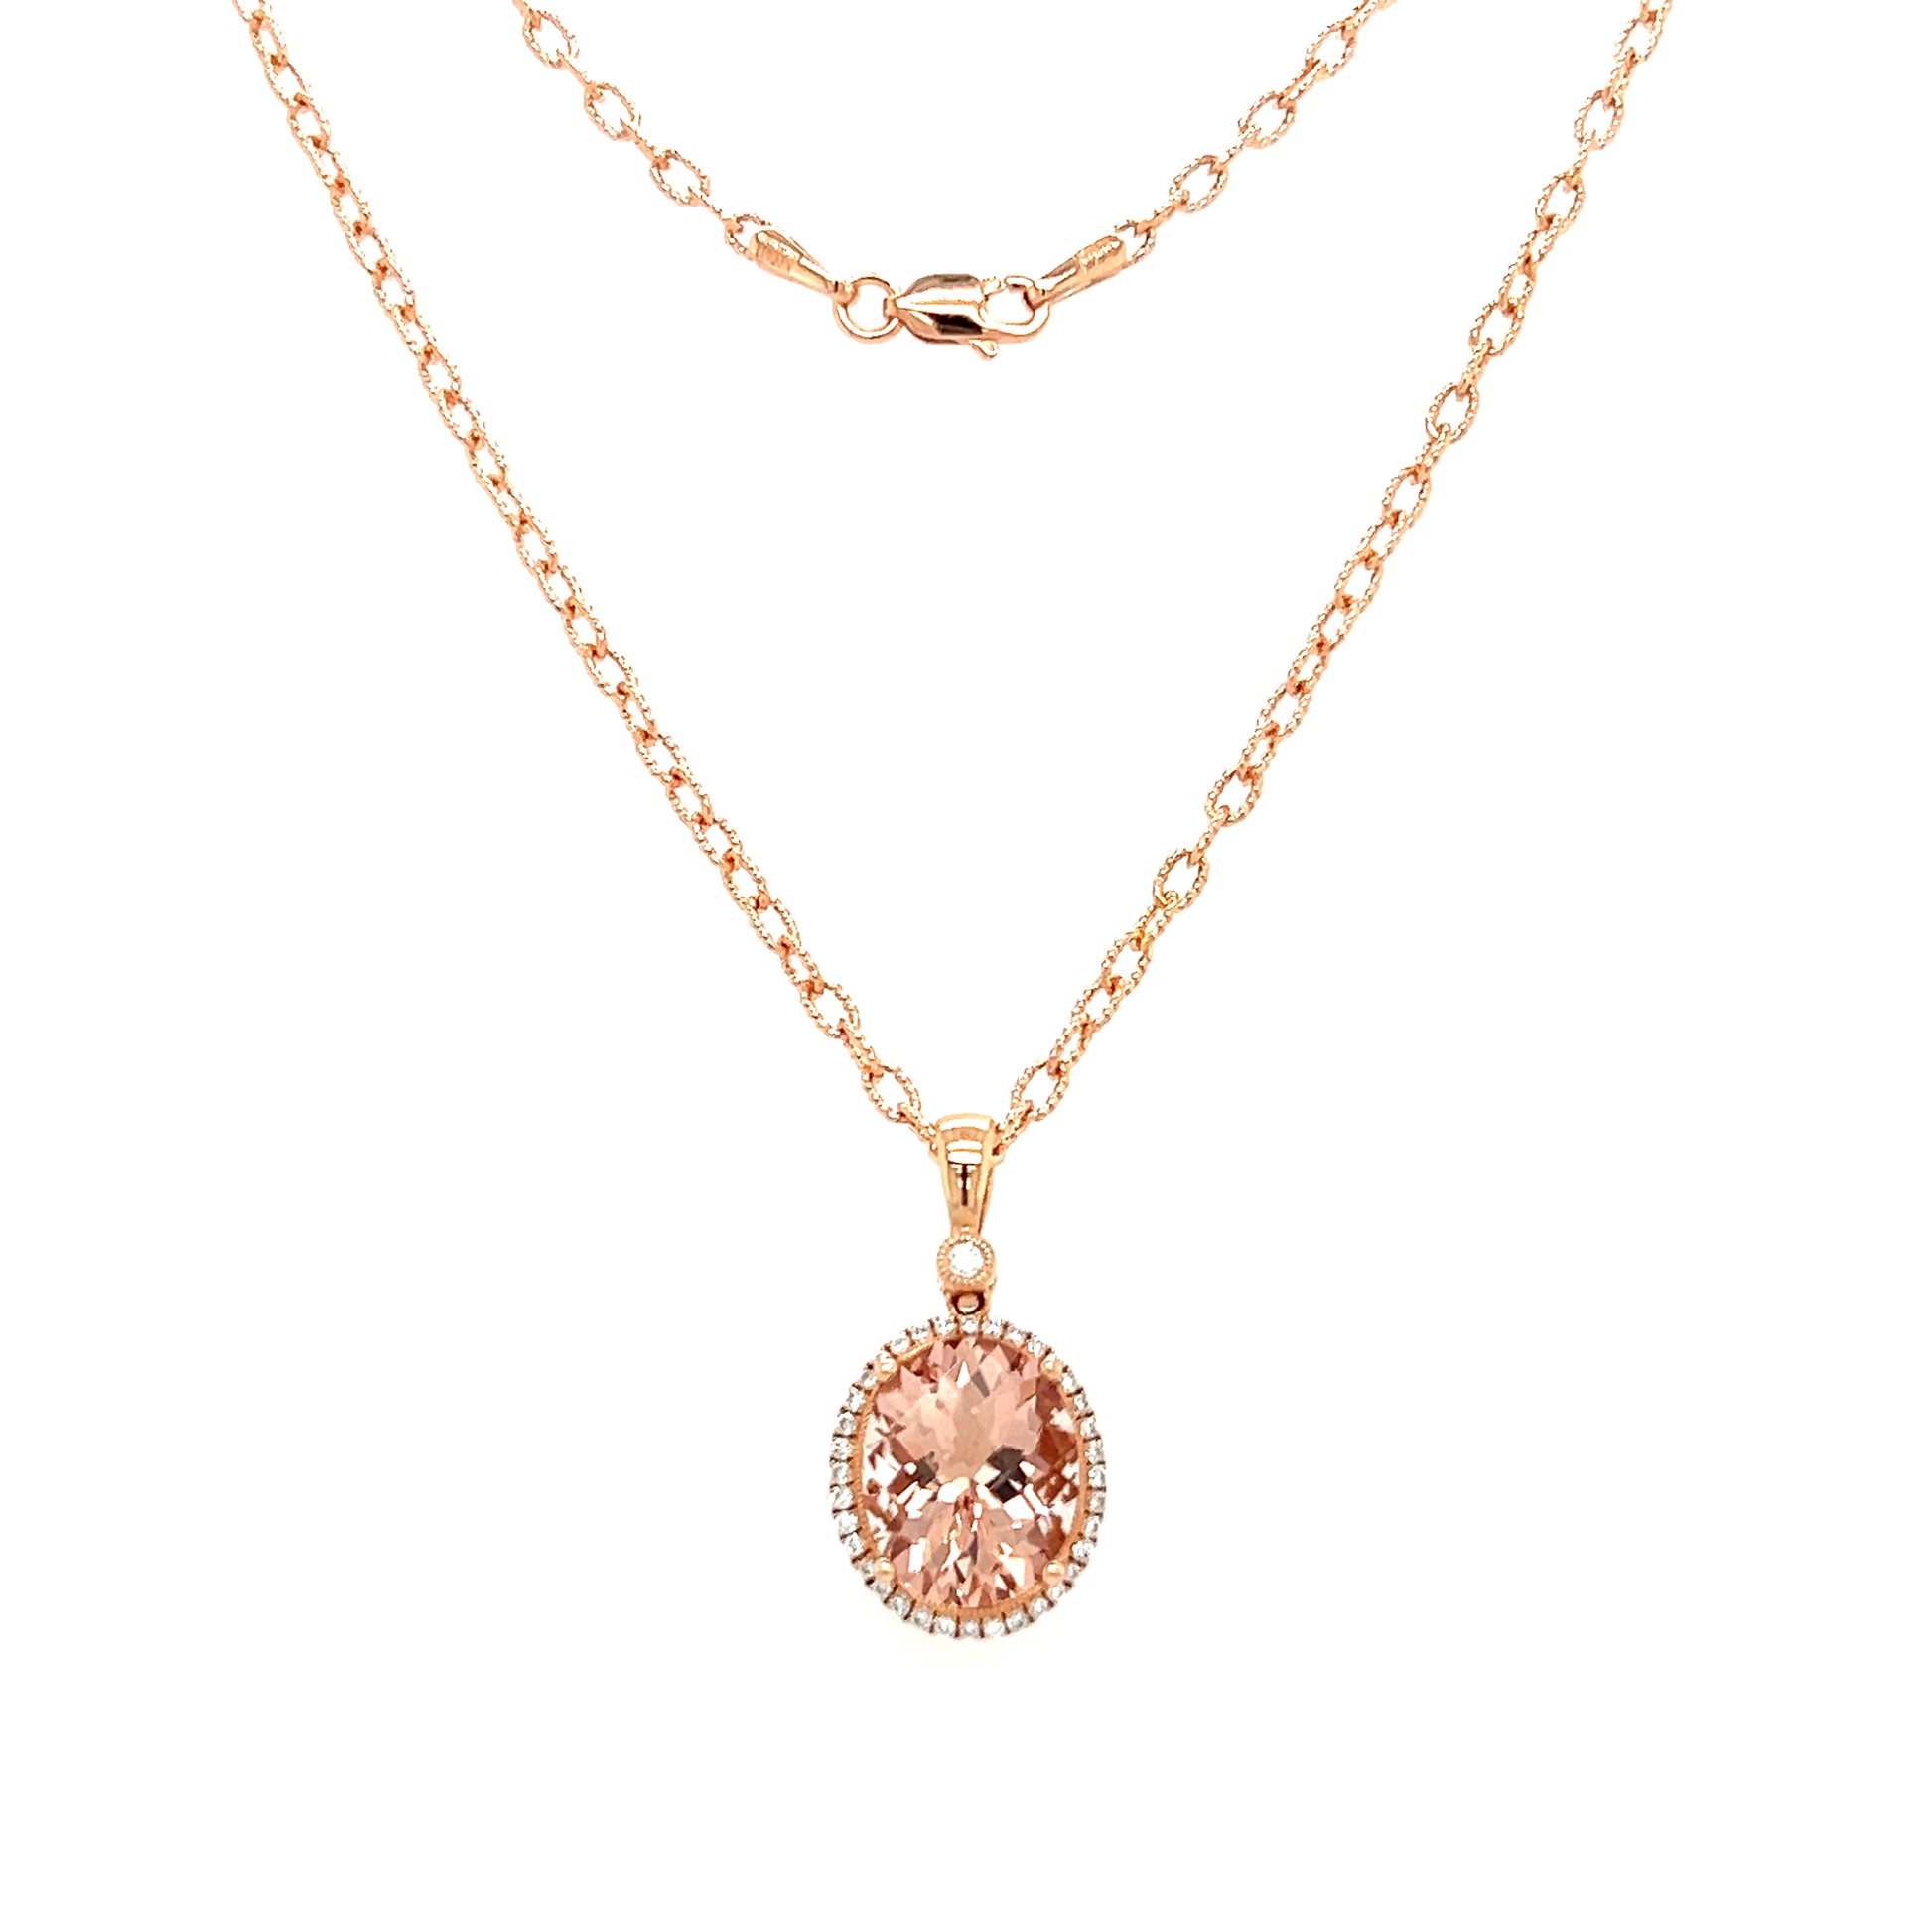 Oval Morganite Necklace with Diamond Halo in 14K Rose Gold. Full Necklace Front View